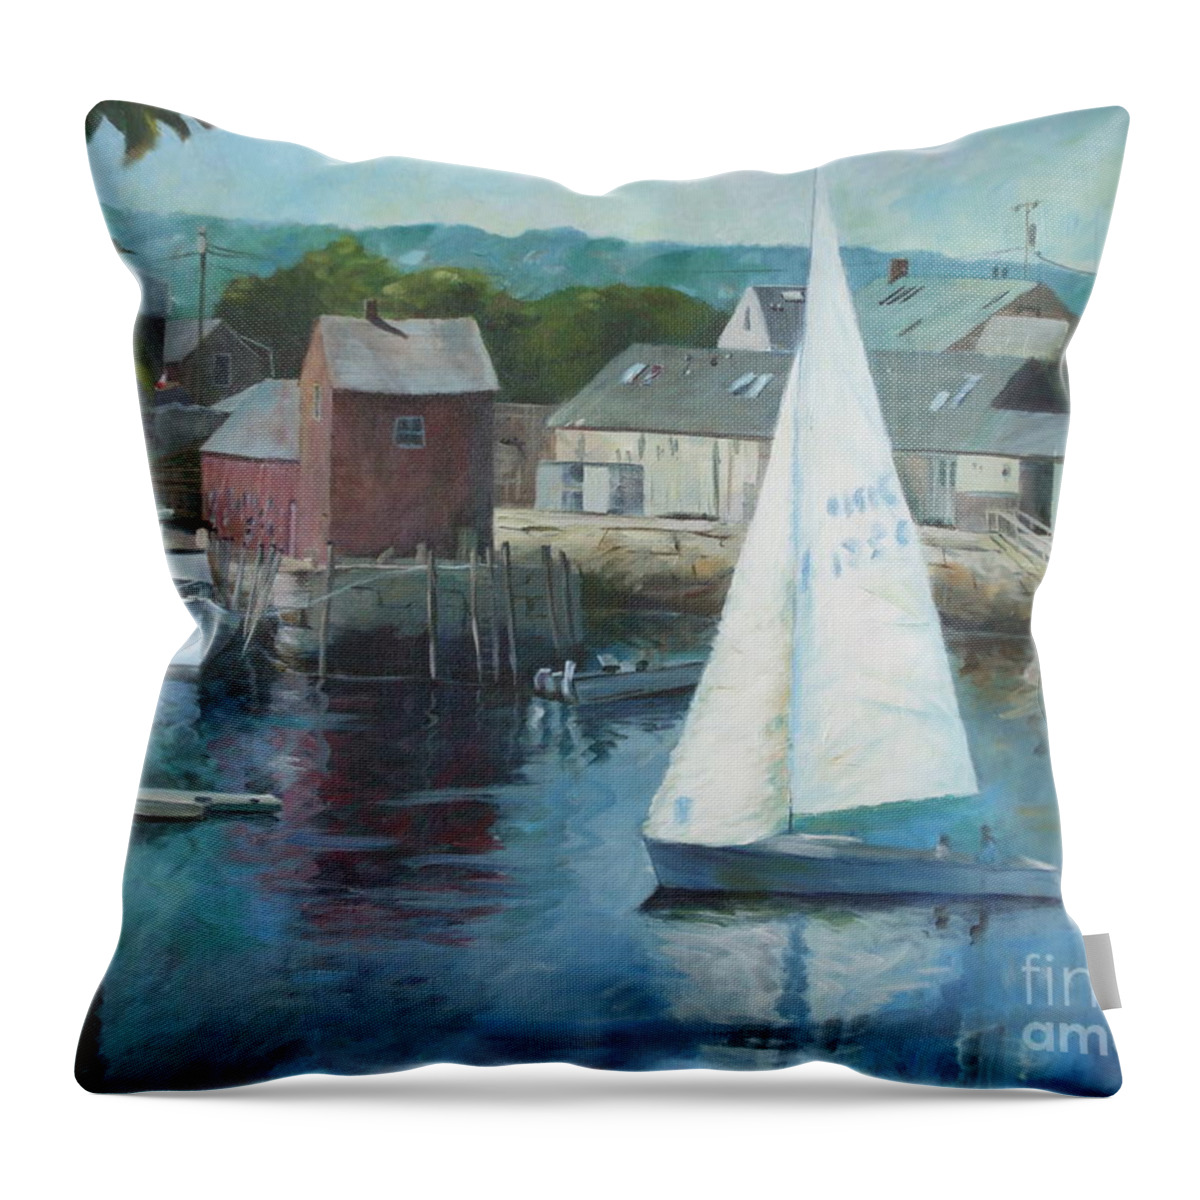 Red Throw Pillow featuring the painting Saling In Rockport MA by Claire Gagnon